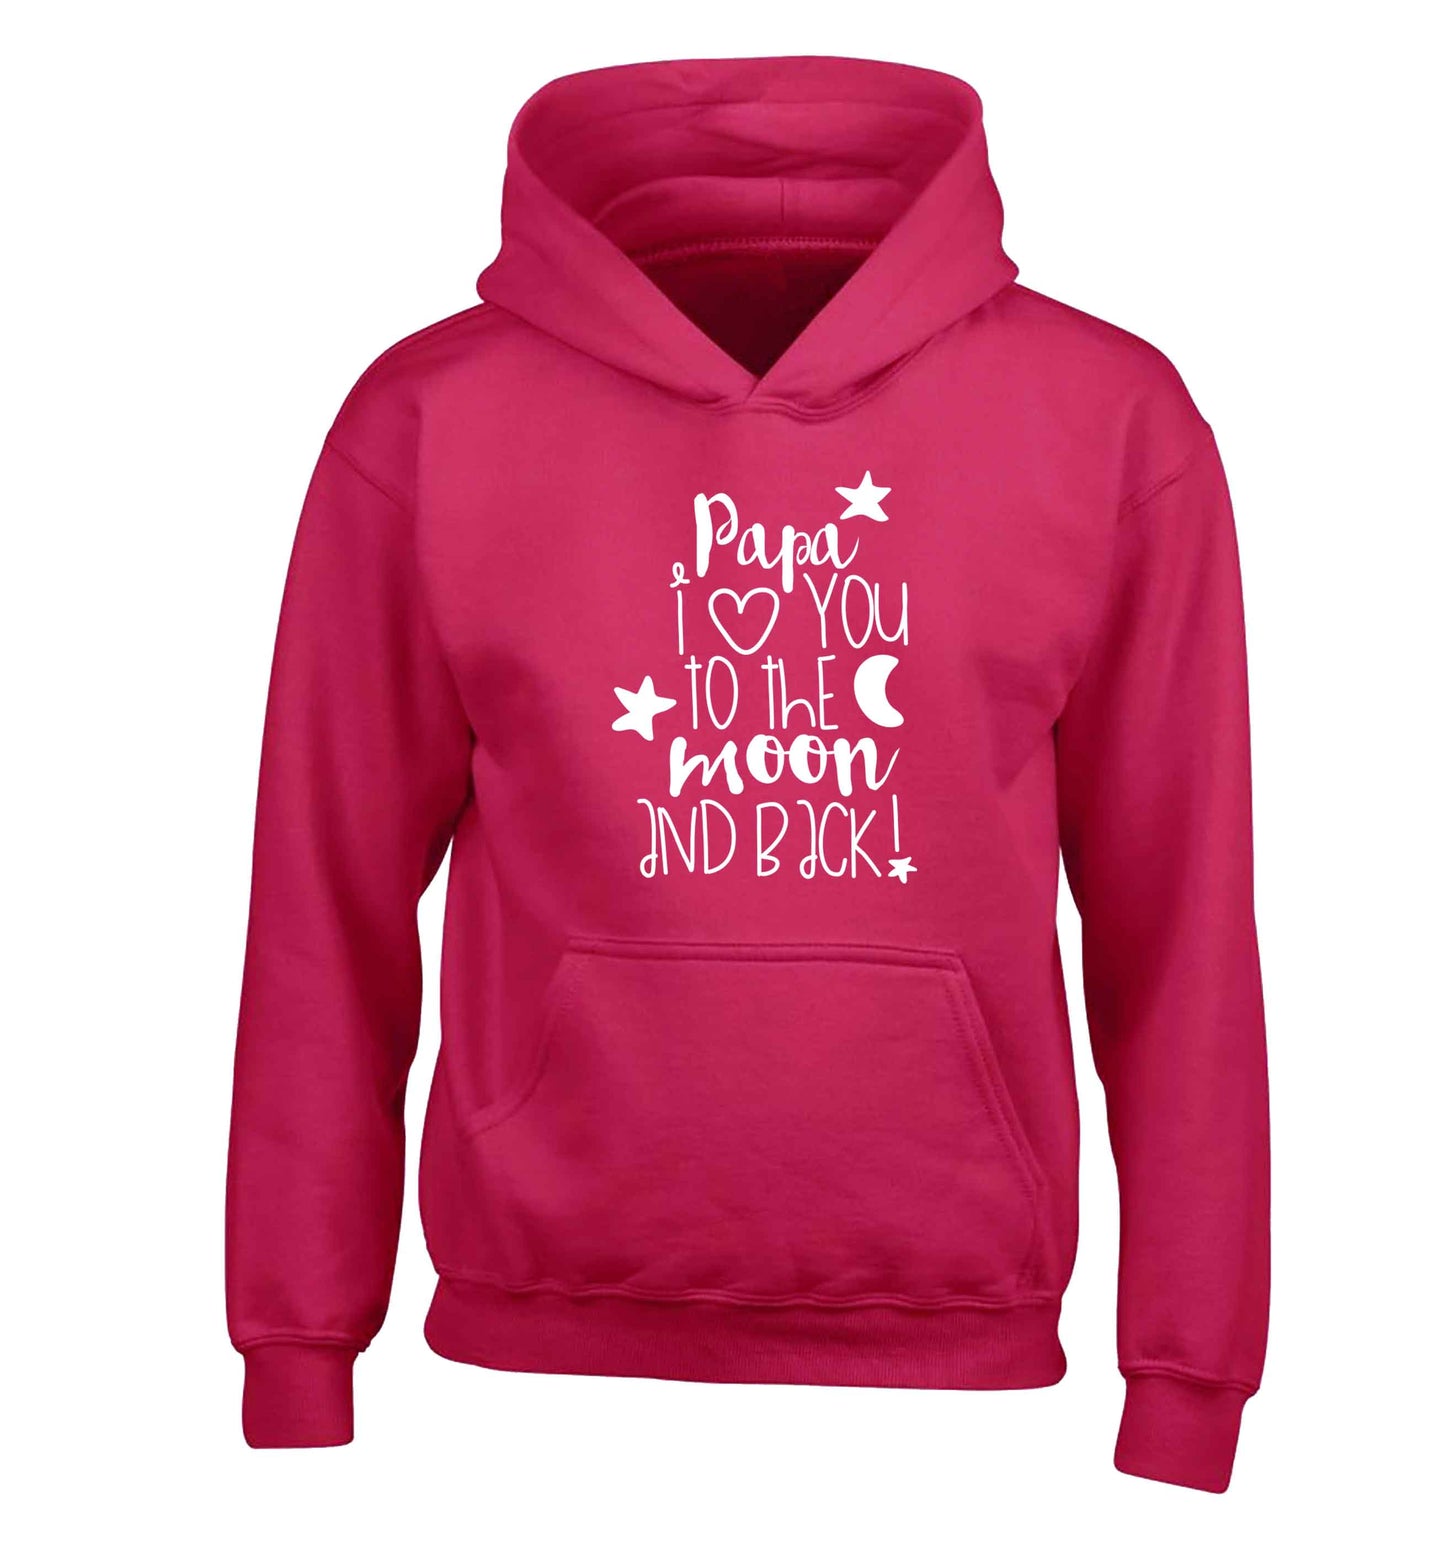 Papa I love you to the moon and back children's pink hoodie 12-13 Years